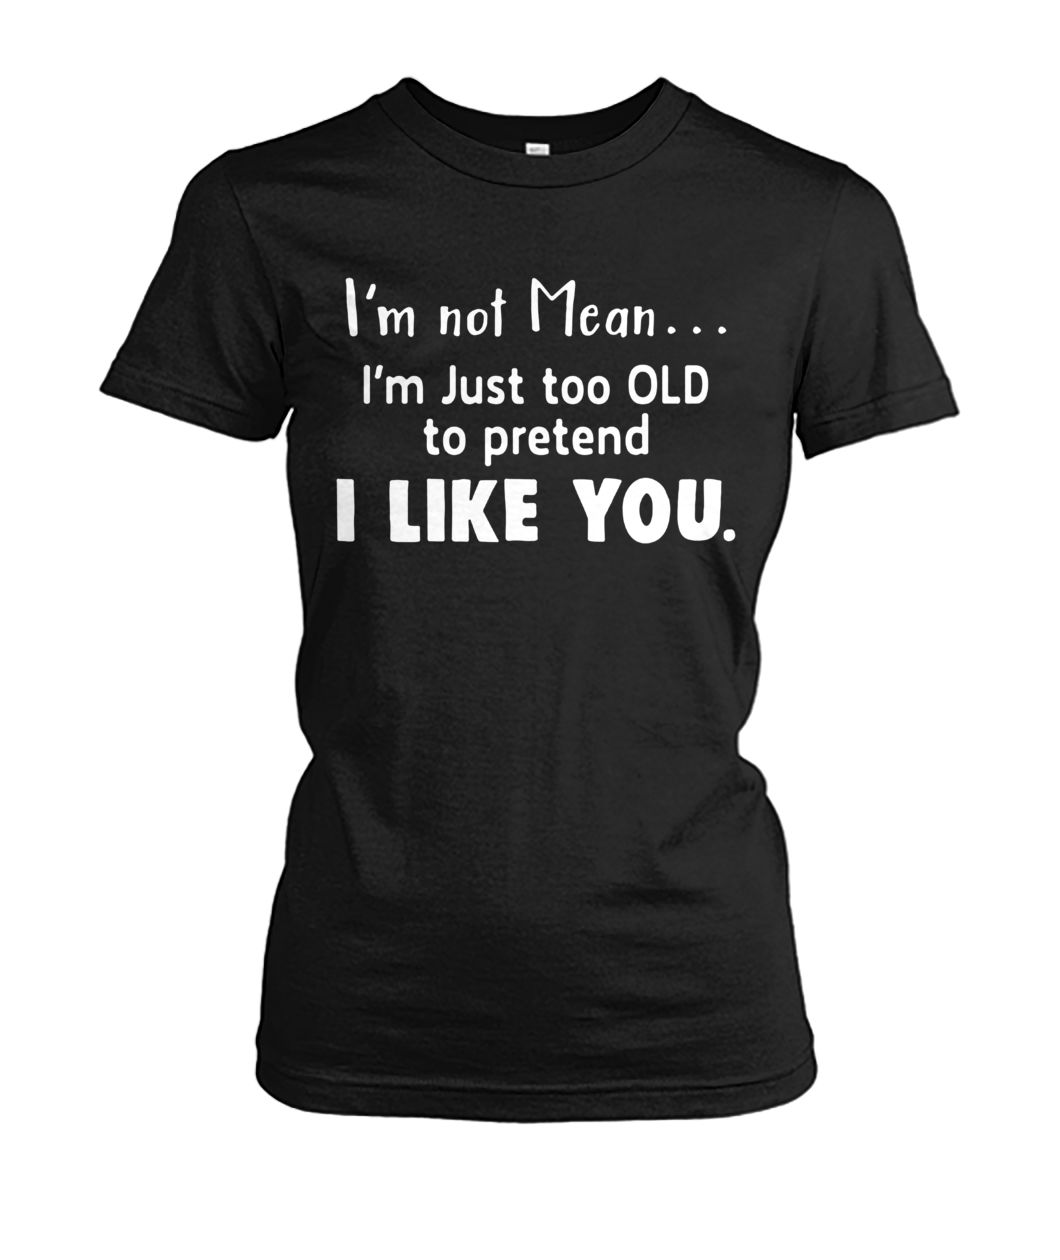 I'm not mean I'm just too old to pretend I like you women's crew tee